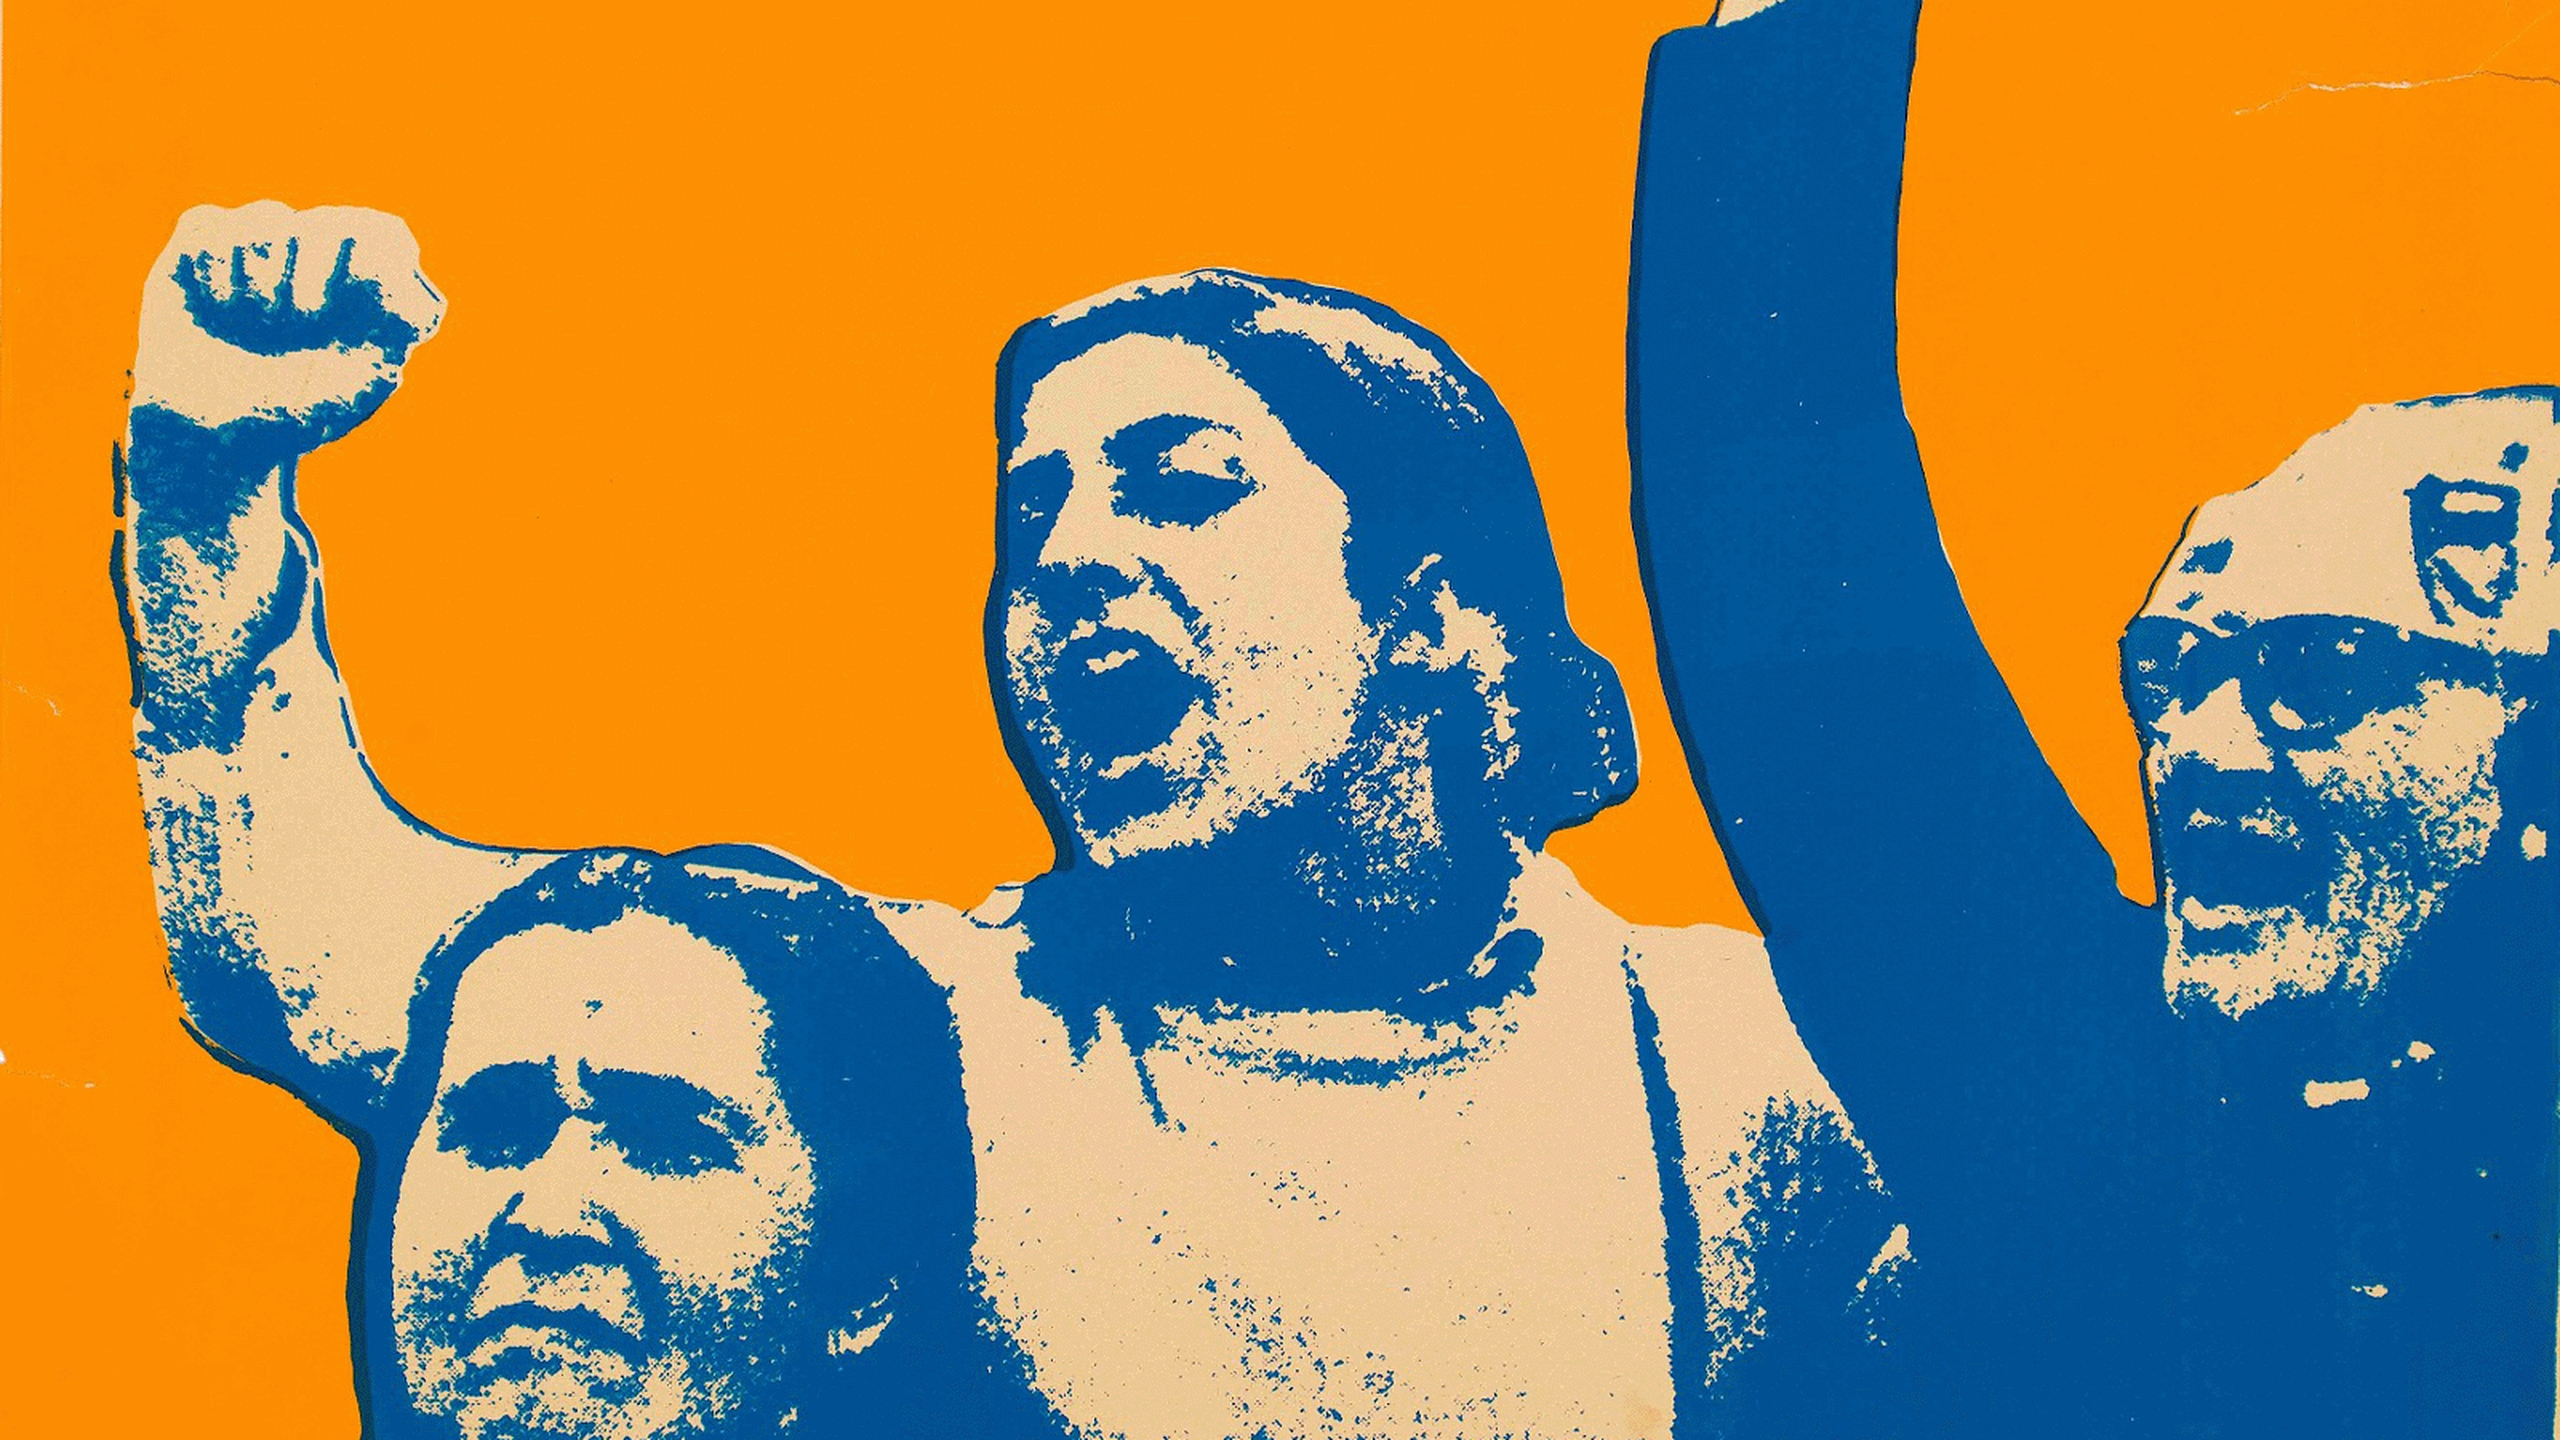 A silkscreen print of three women, of varying ages and heritages. All of them have their fists raised in anger and solidarity.